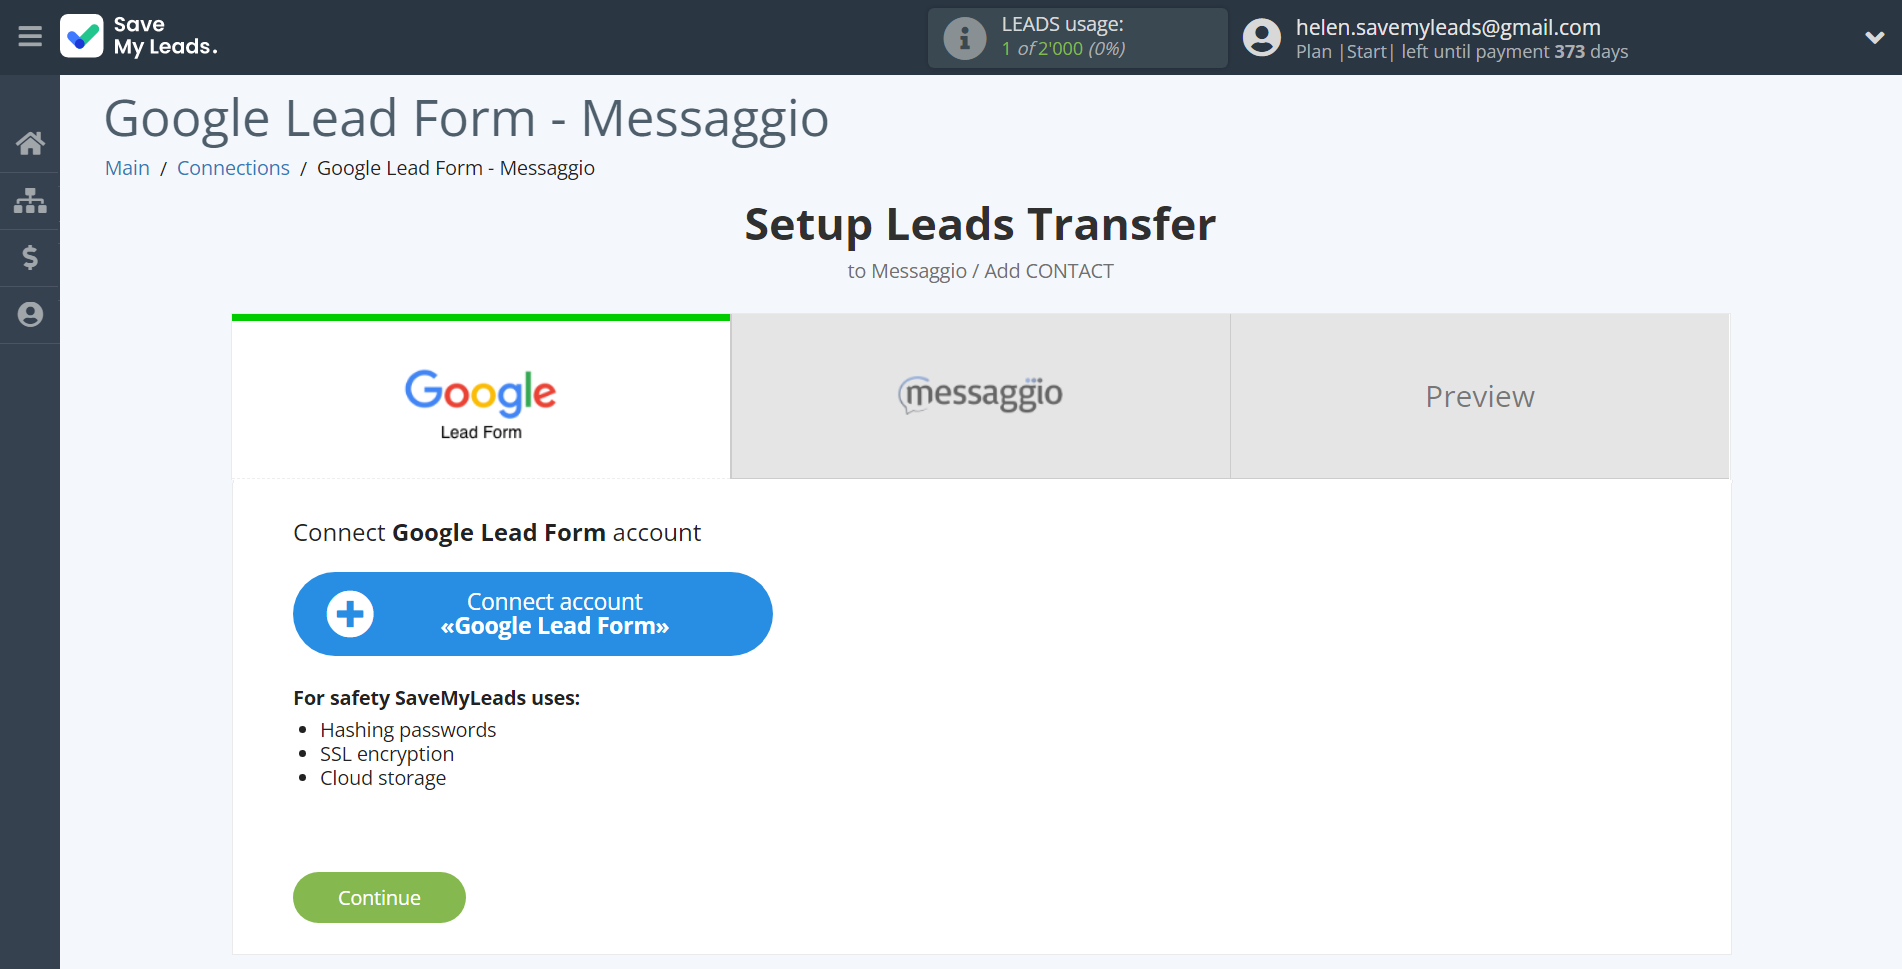 How to Connect Google Lead Form with Messaggio | Data Source account